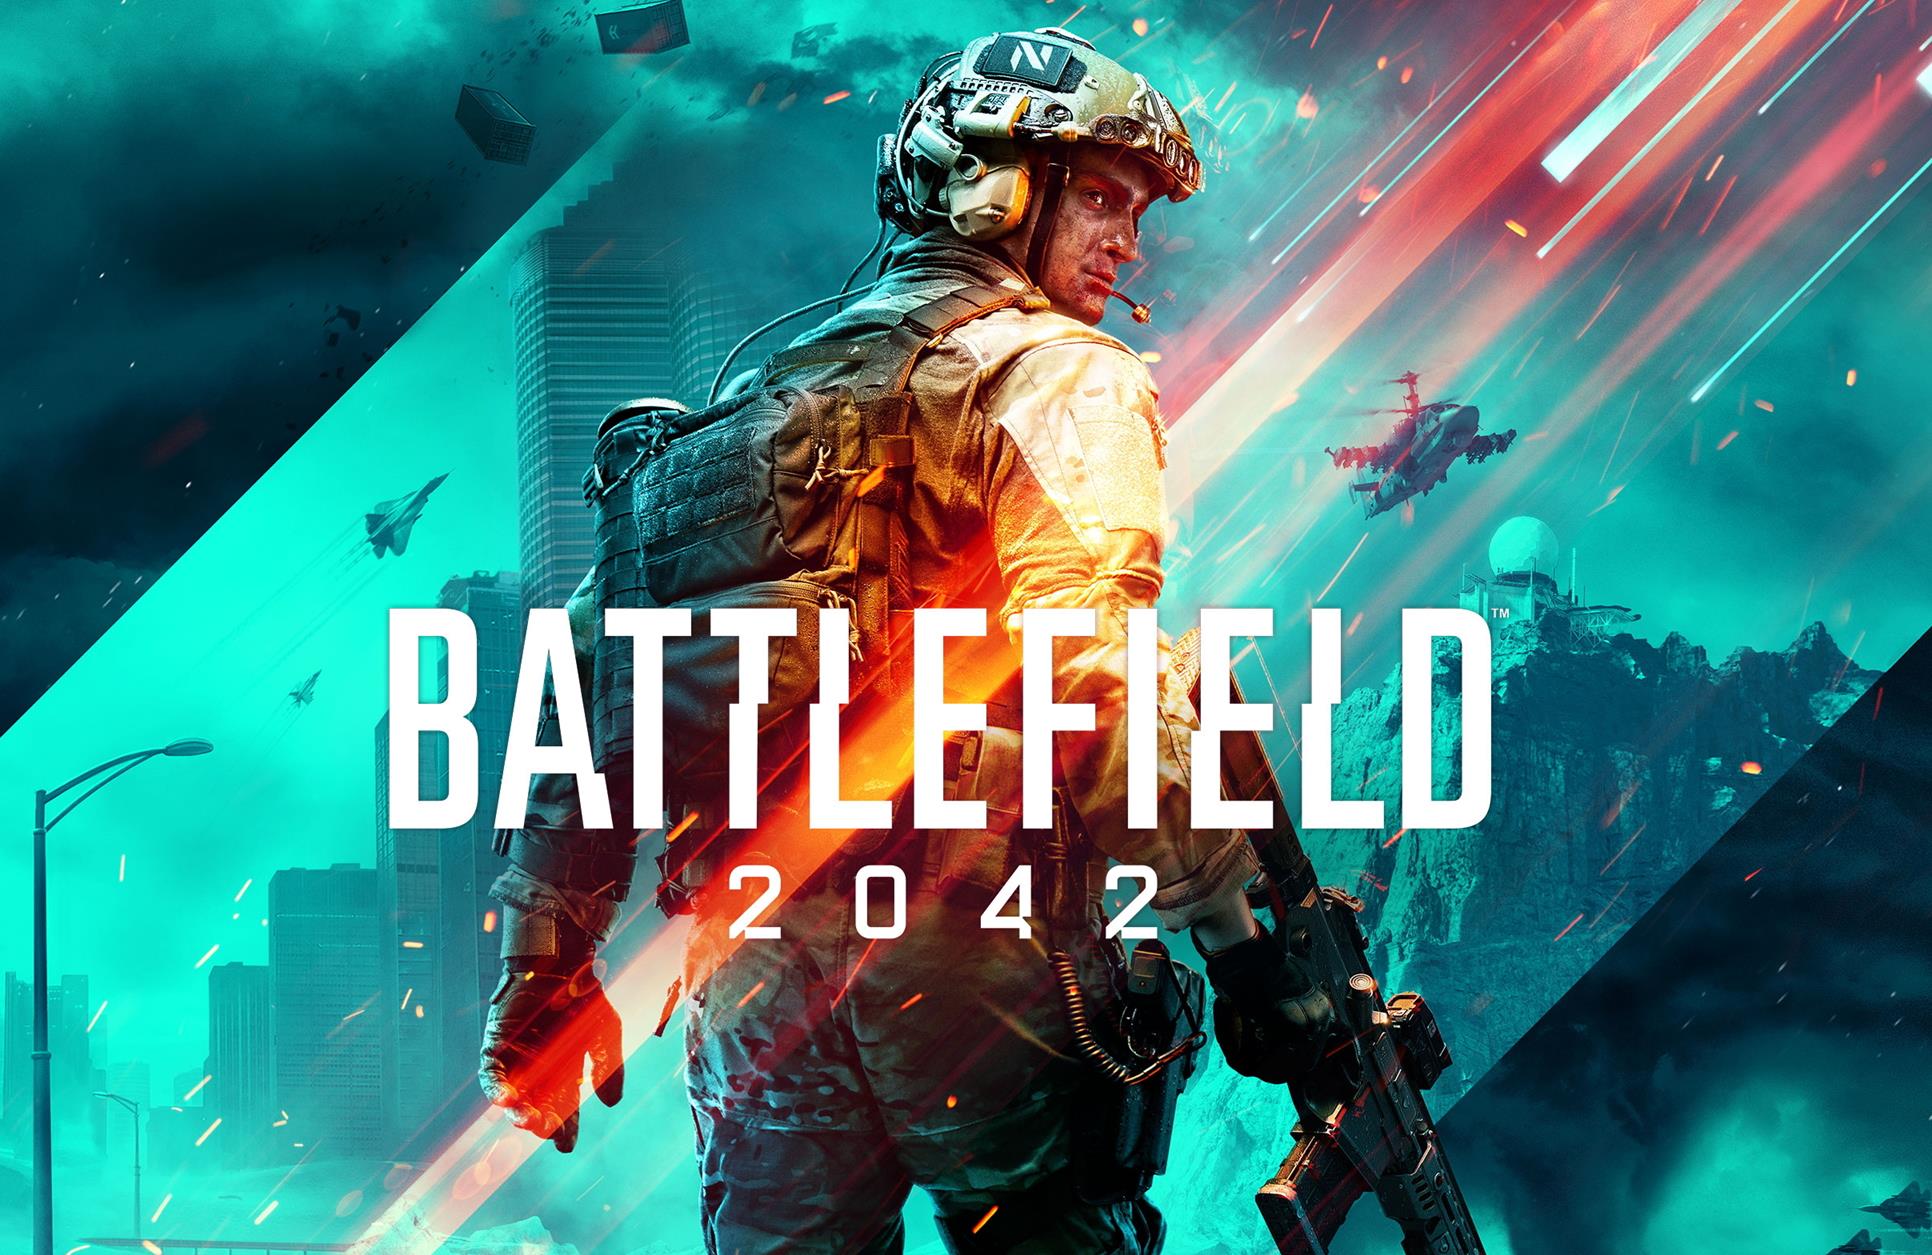 Image for Battlefield 2042 open beta coming this September